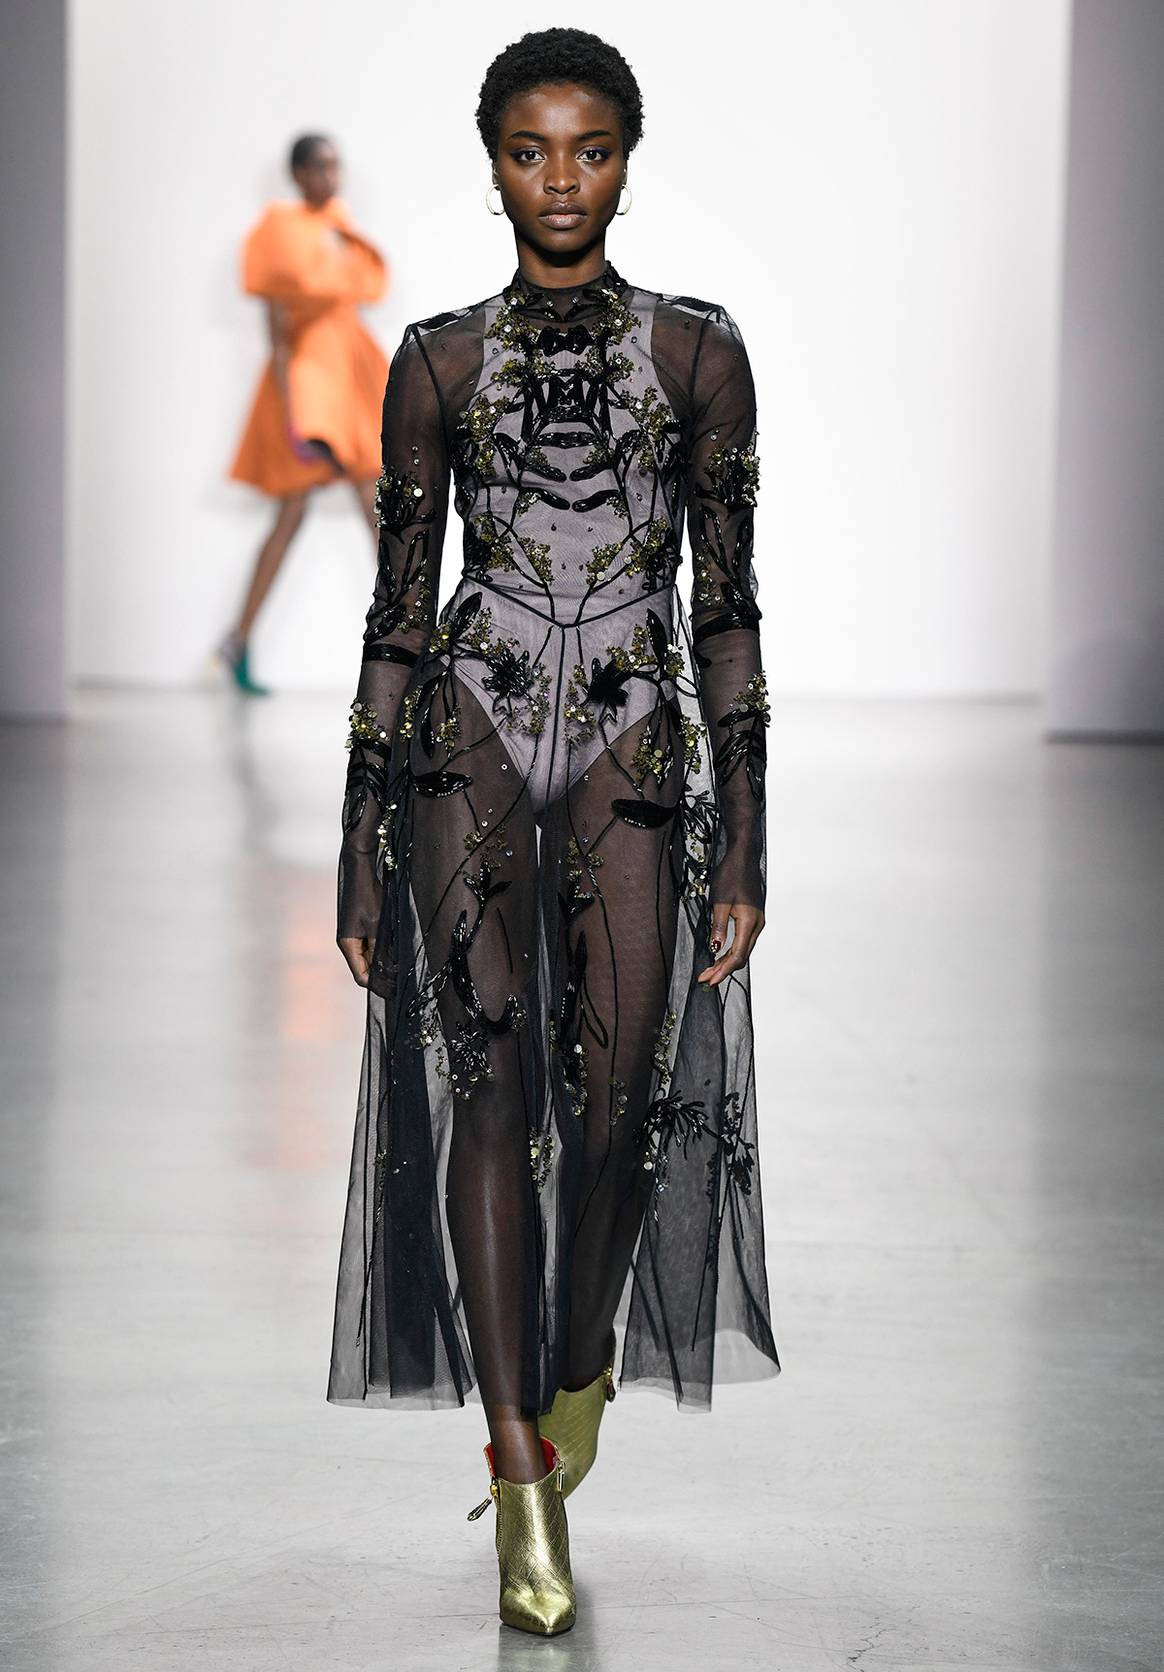 FW22: the top five trends store buyers need to know from NYFW